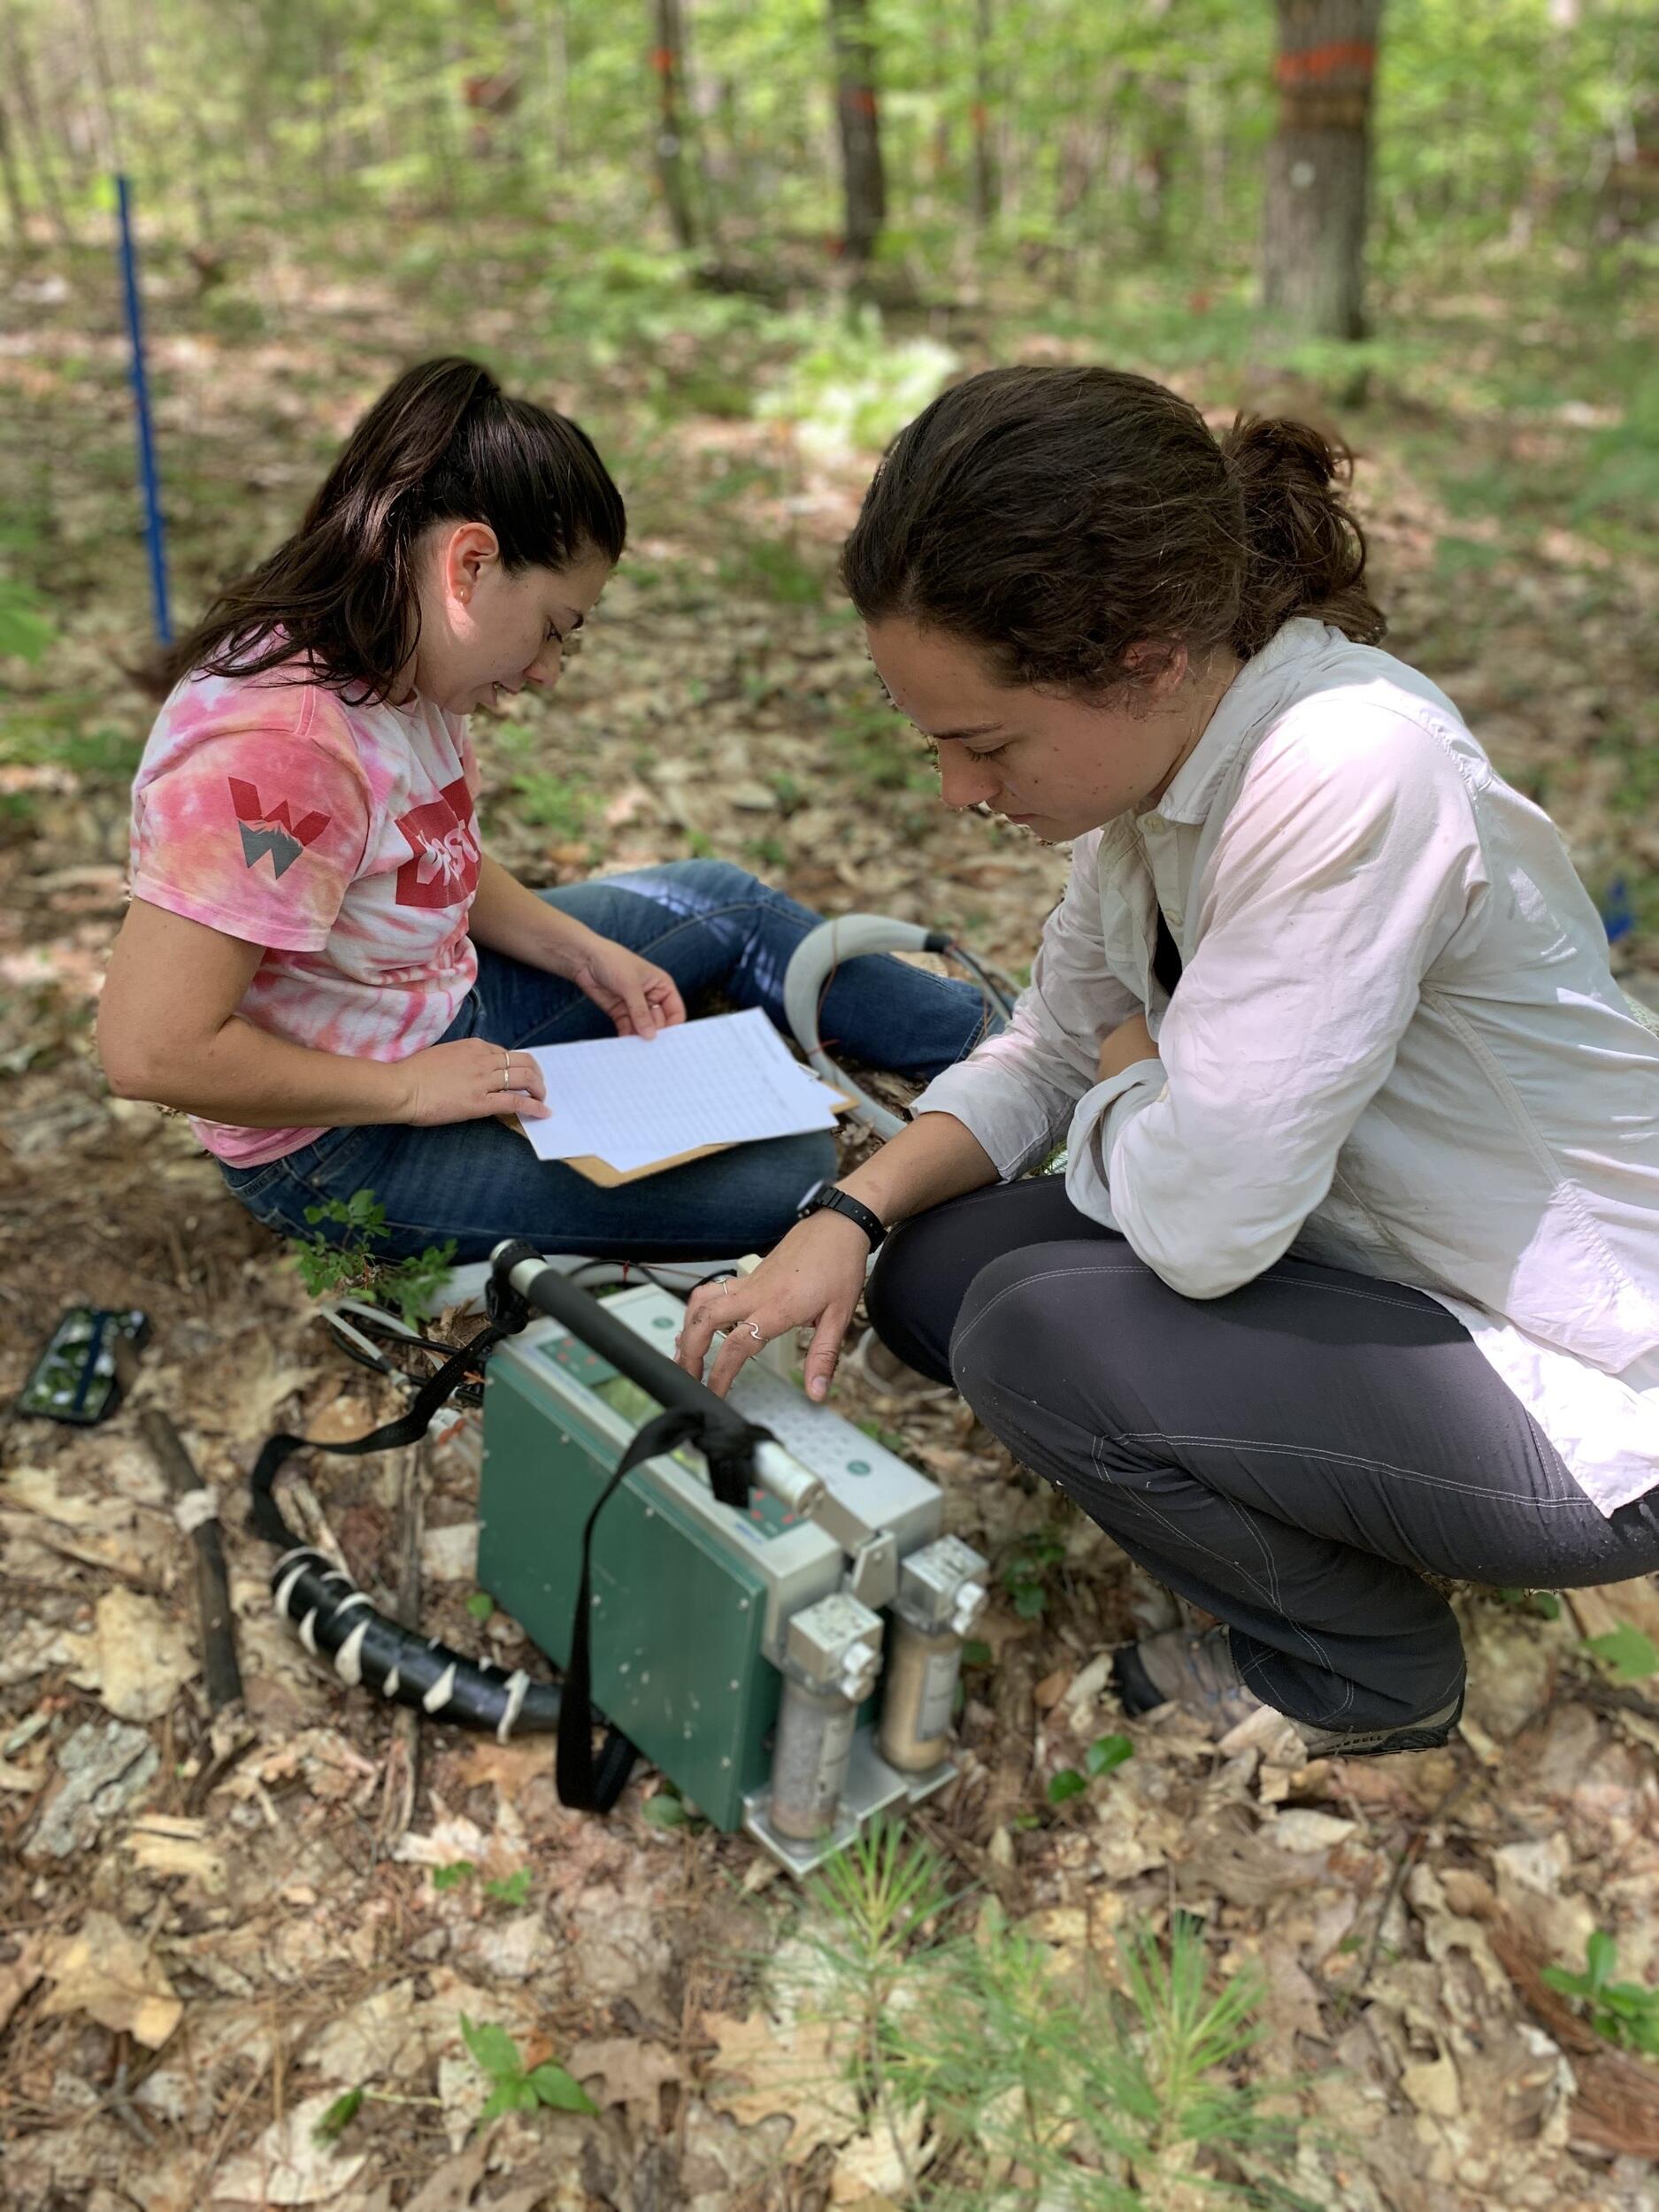 Kayla Mathes, a VCU Ph.D. candidate in integrative life sciences, and Carly Rodriguez, a Western Colorado University undergrad and National Science Foundation Research Experiences for Undergraduates Fellow. Mathes is measuring the emissions of carbon dioxide from forest soils. (Courtesy photo)
